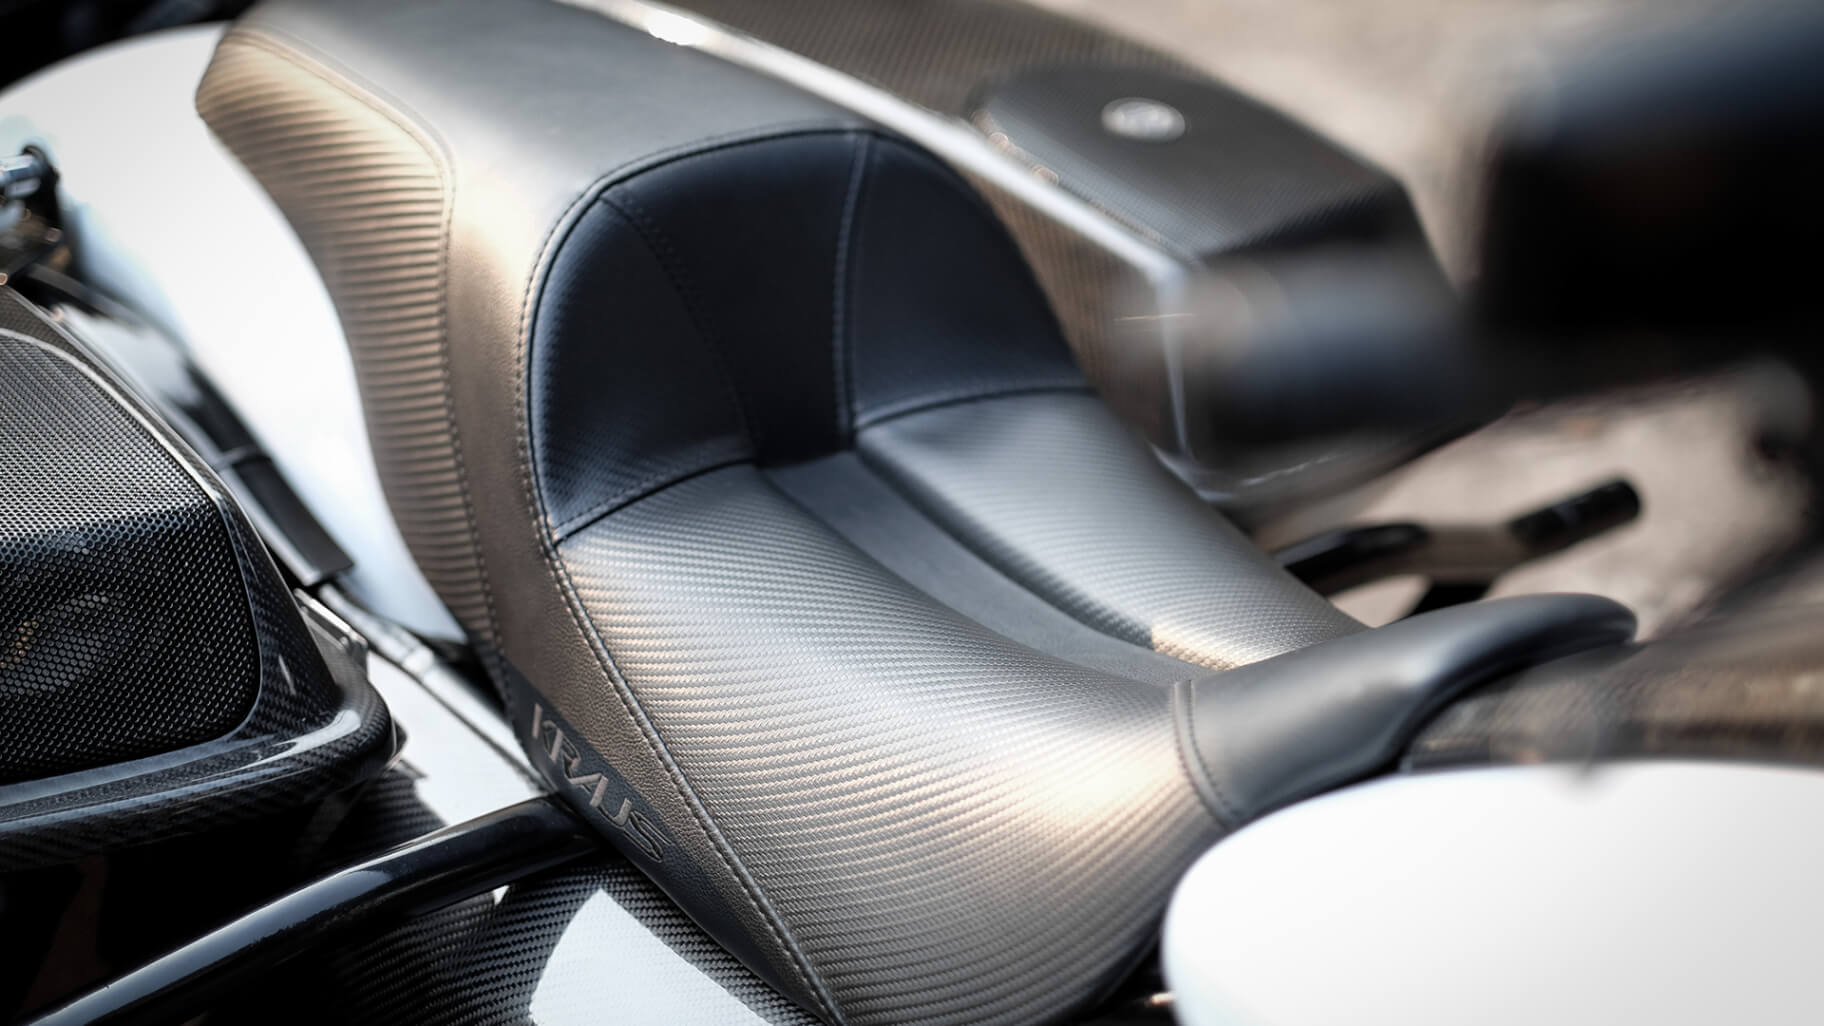 Kraus Moto Update V-Twin Seat for Performance 